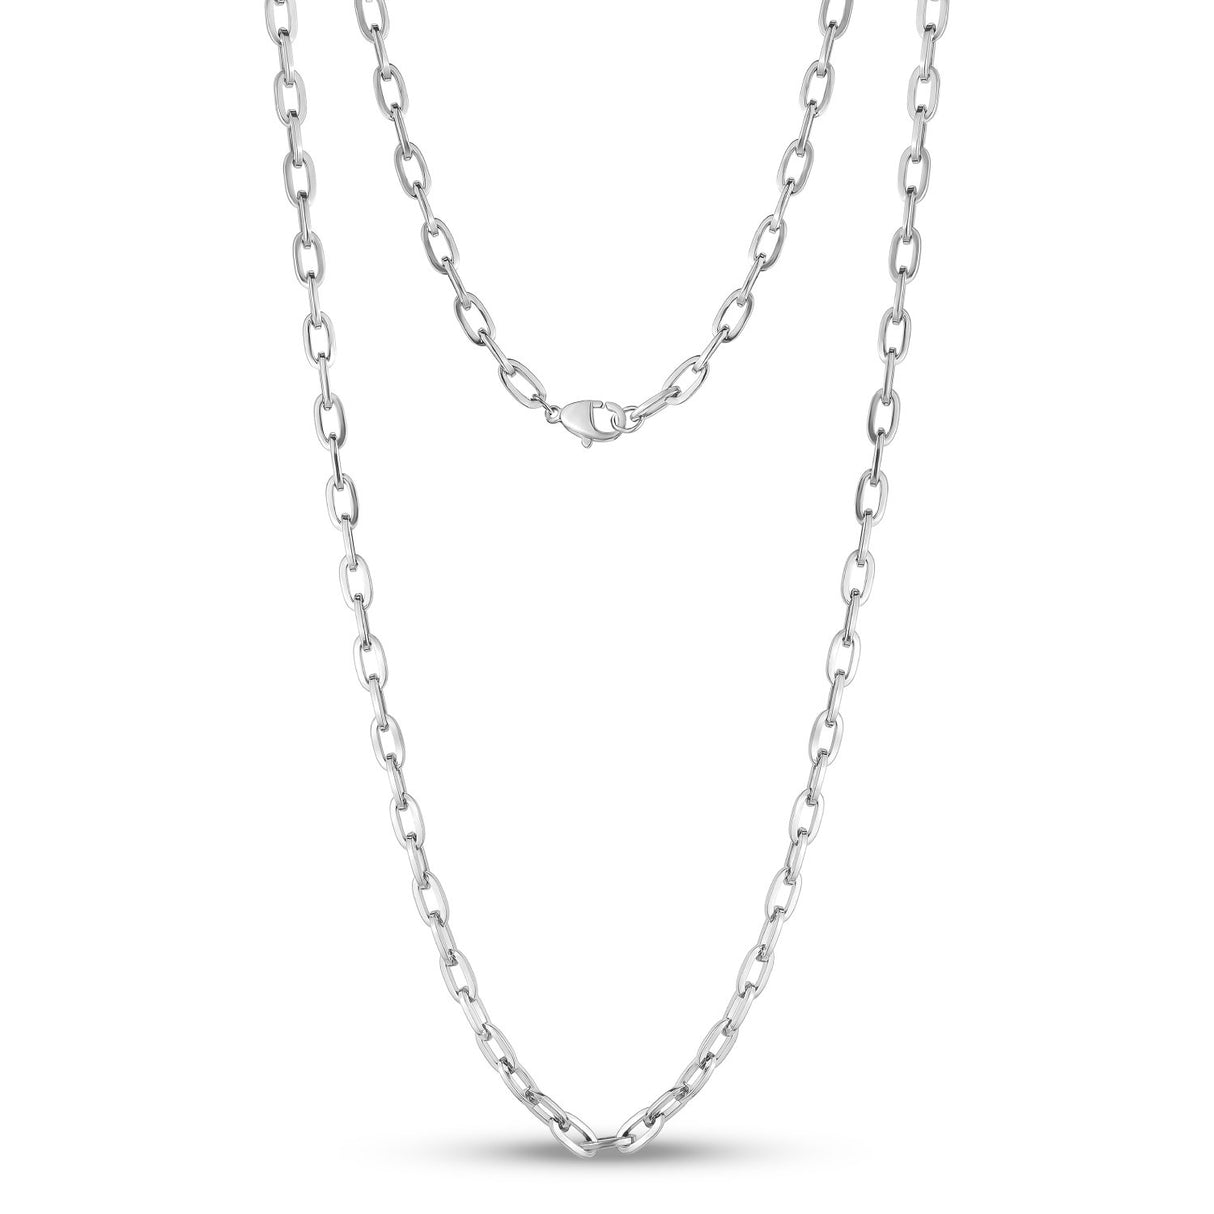 5mm Oval Link Chain - Men Necklace - The Steel Shop